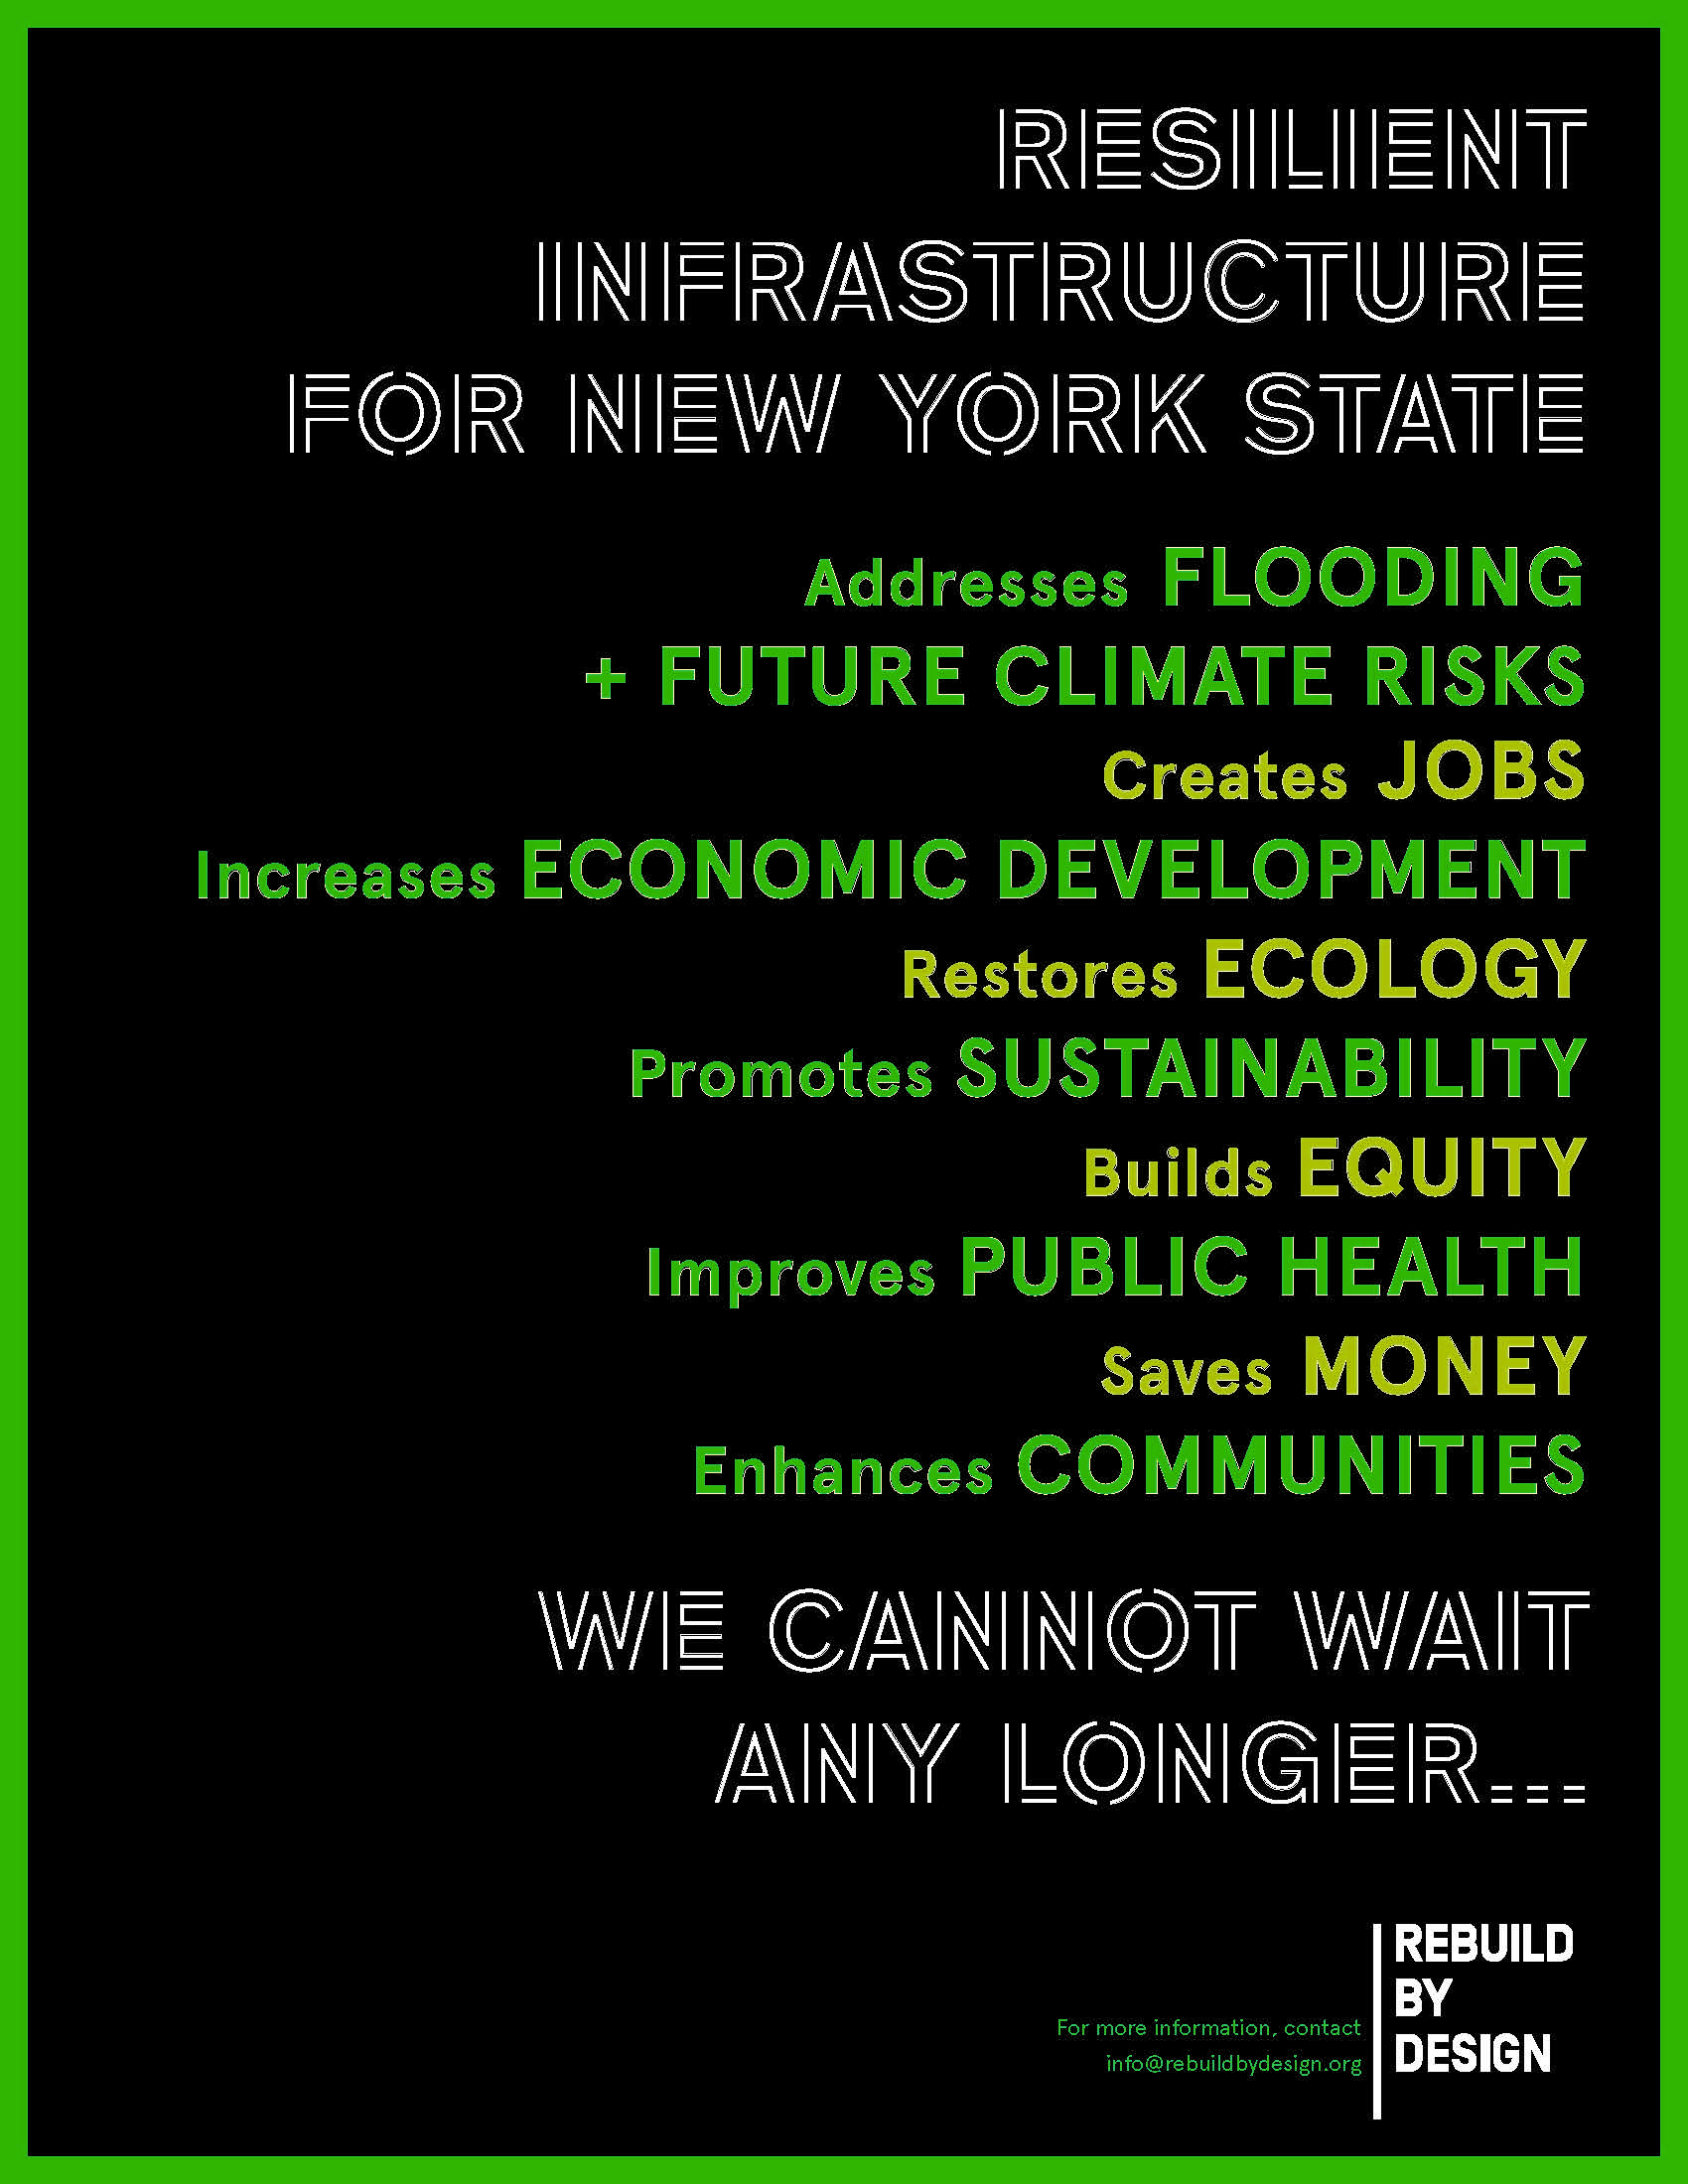 RESILIENT INFRASTRUCTURE FUND FOR NYS